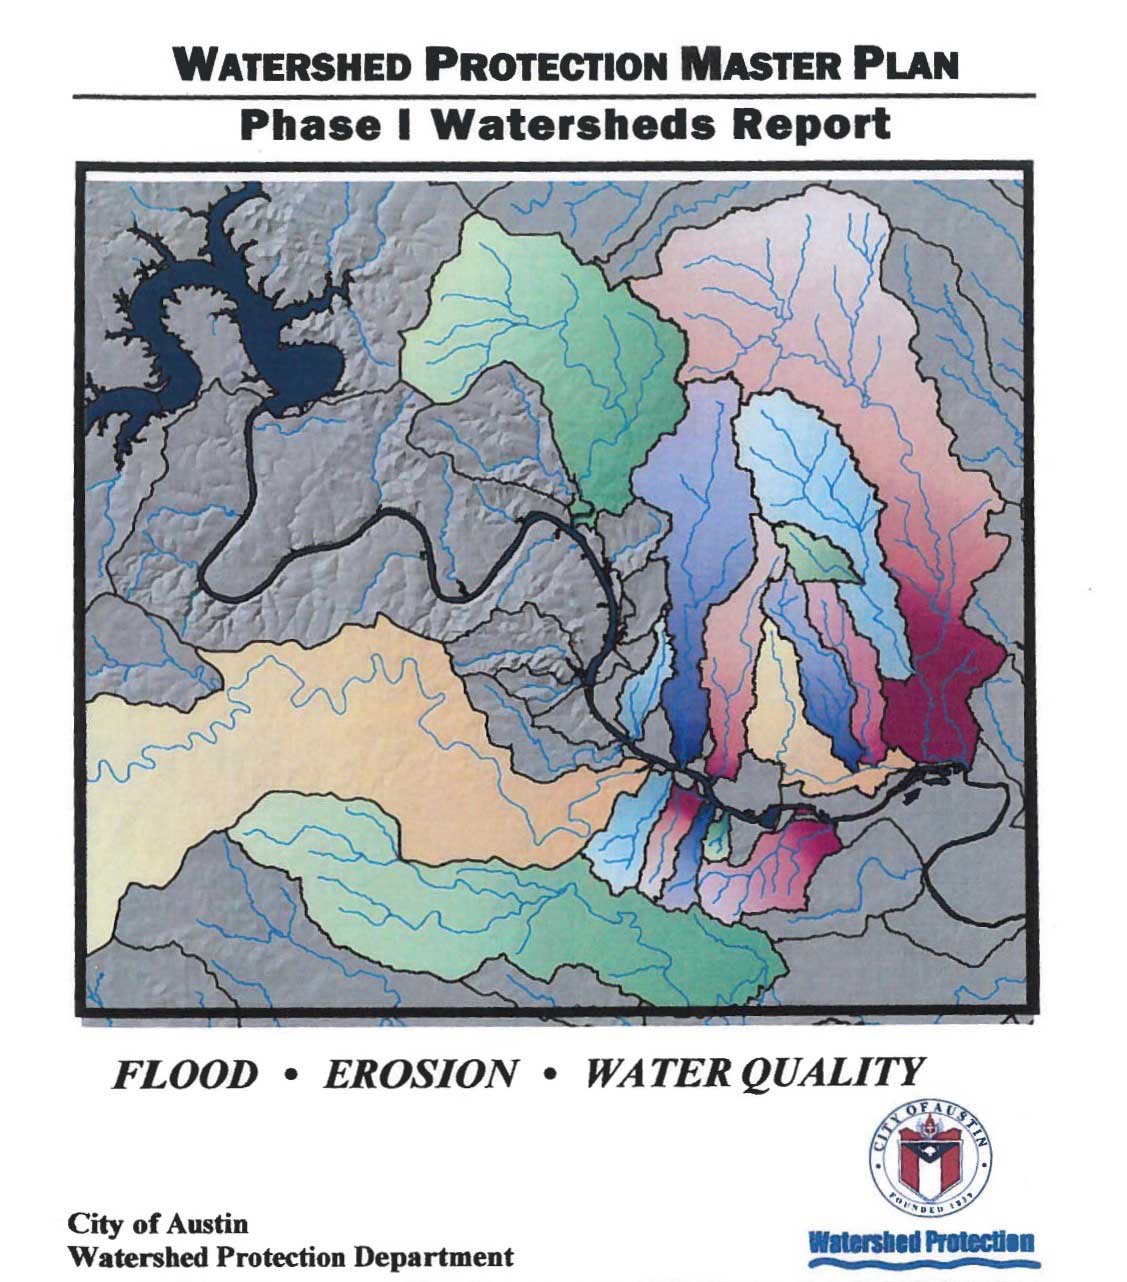 Cover of the Watershd Protection Master Plan